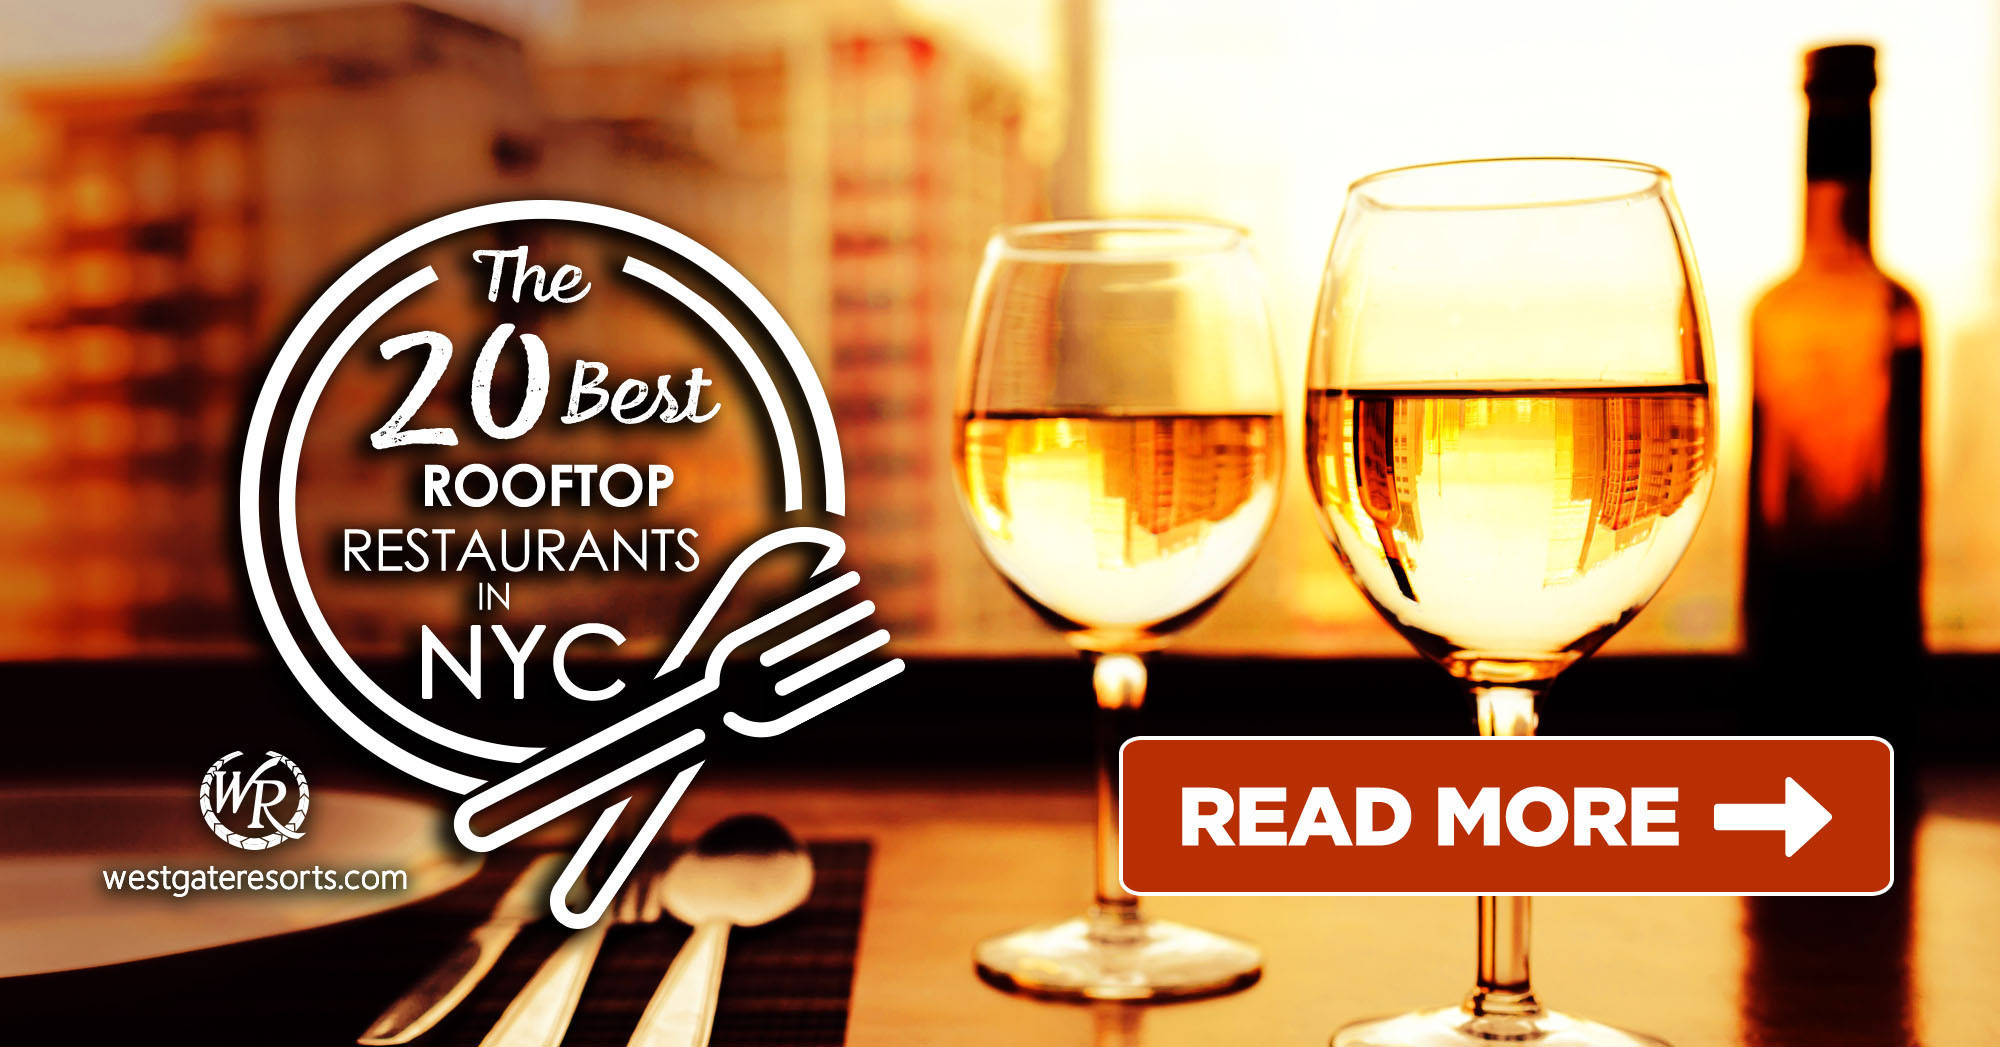 The 20 Best Rooftop Restaurants in NYC [2022 Guide]